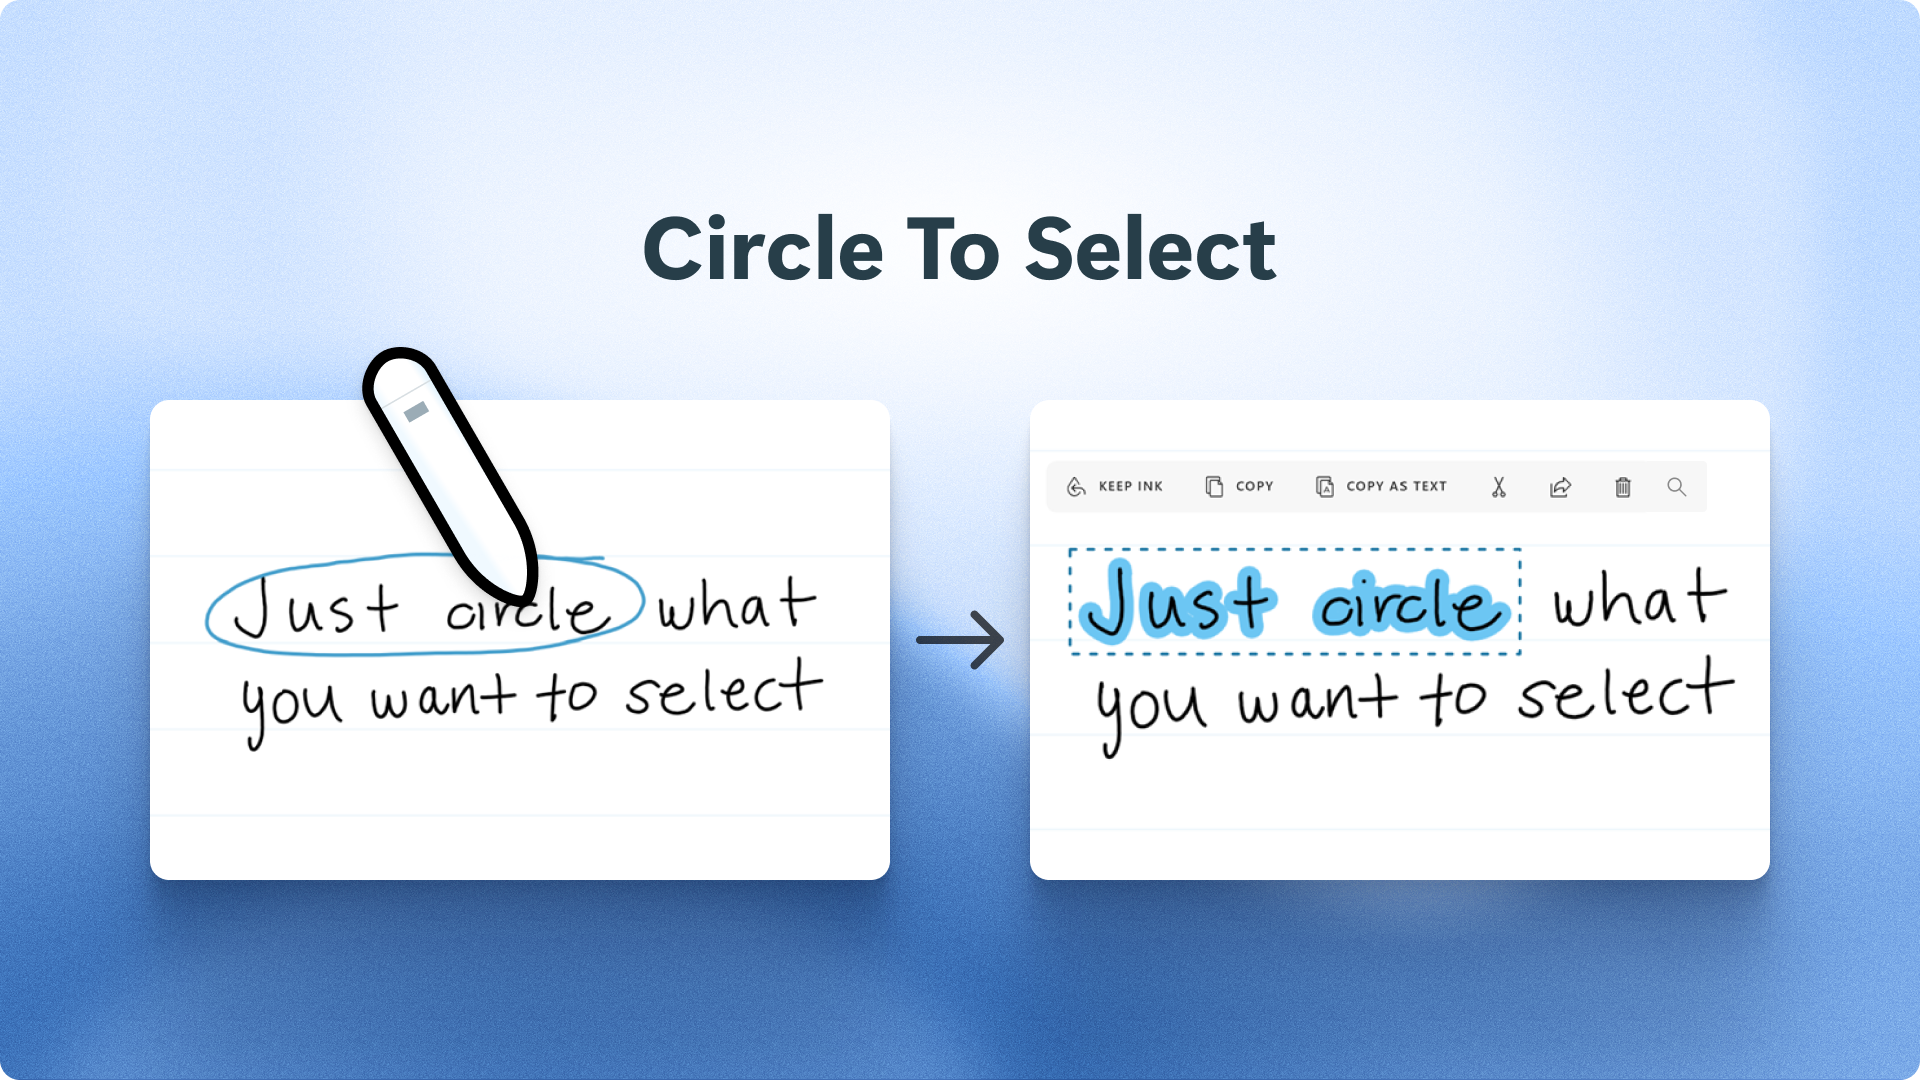 Demonstration of selecting words using instant lasso by circling them with the ink